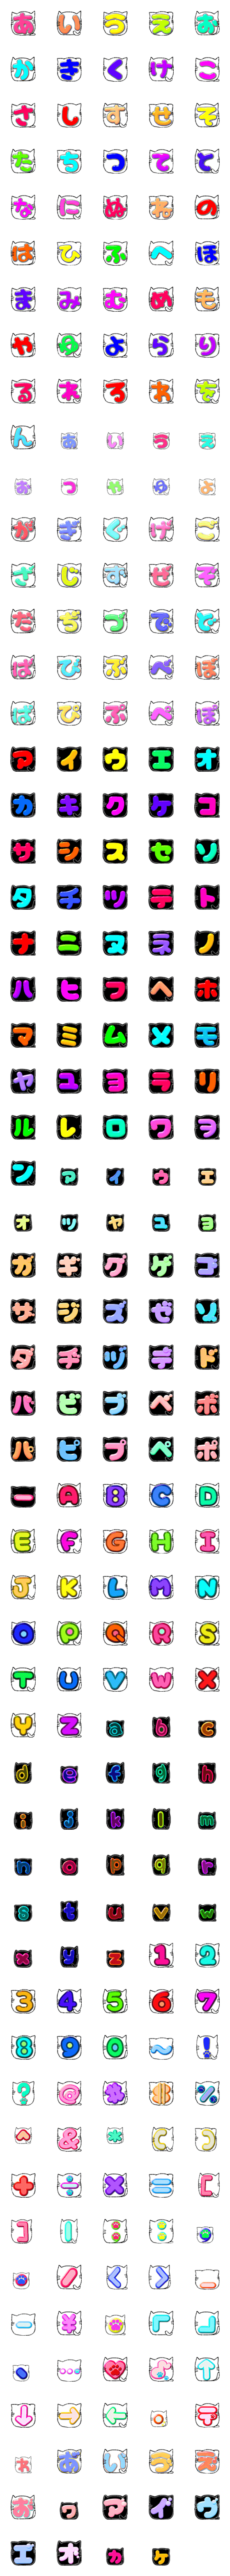 [LINE絵文字]ぷくにゃお デコ文字の画像一覧